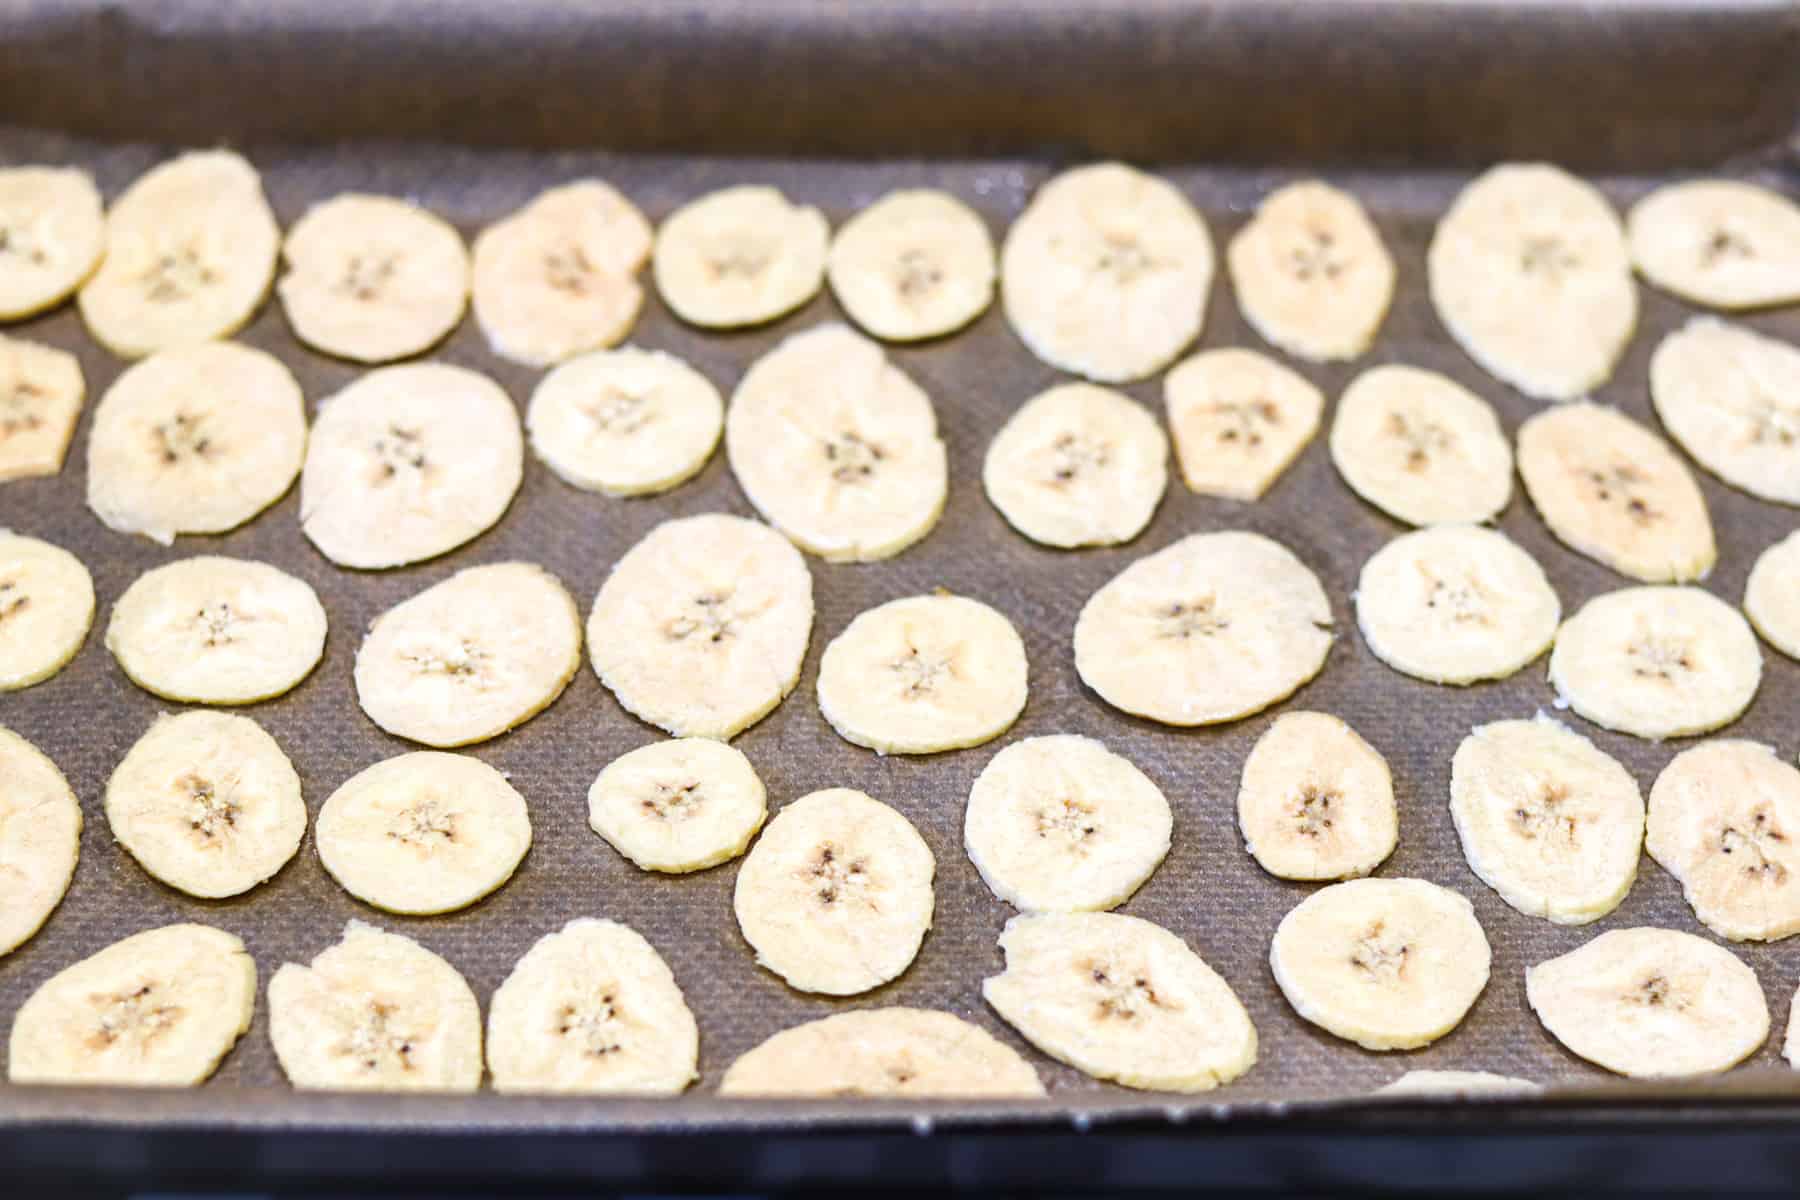 Plantain slices on a baking tray